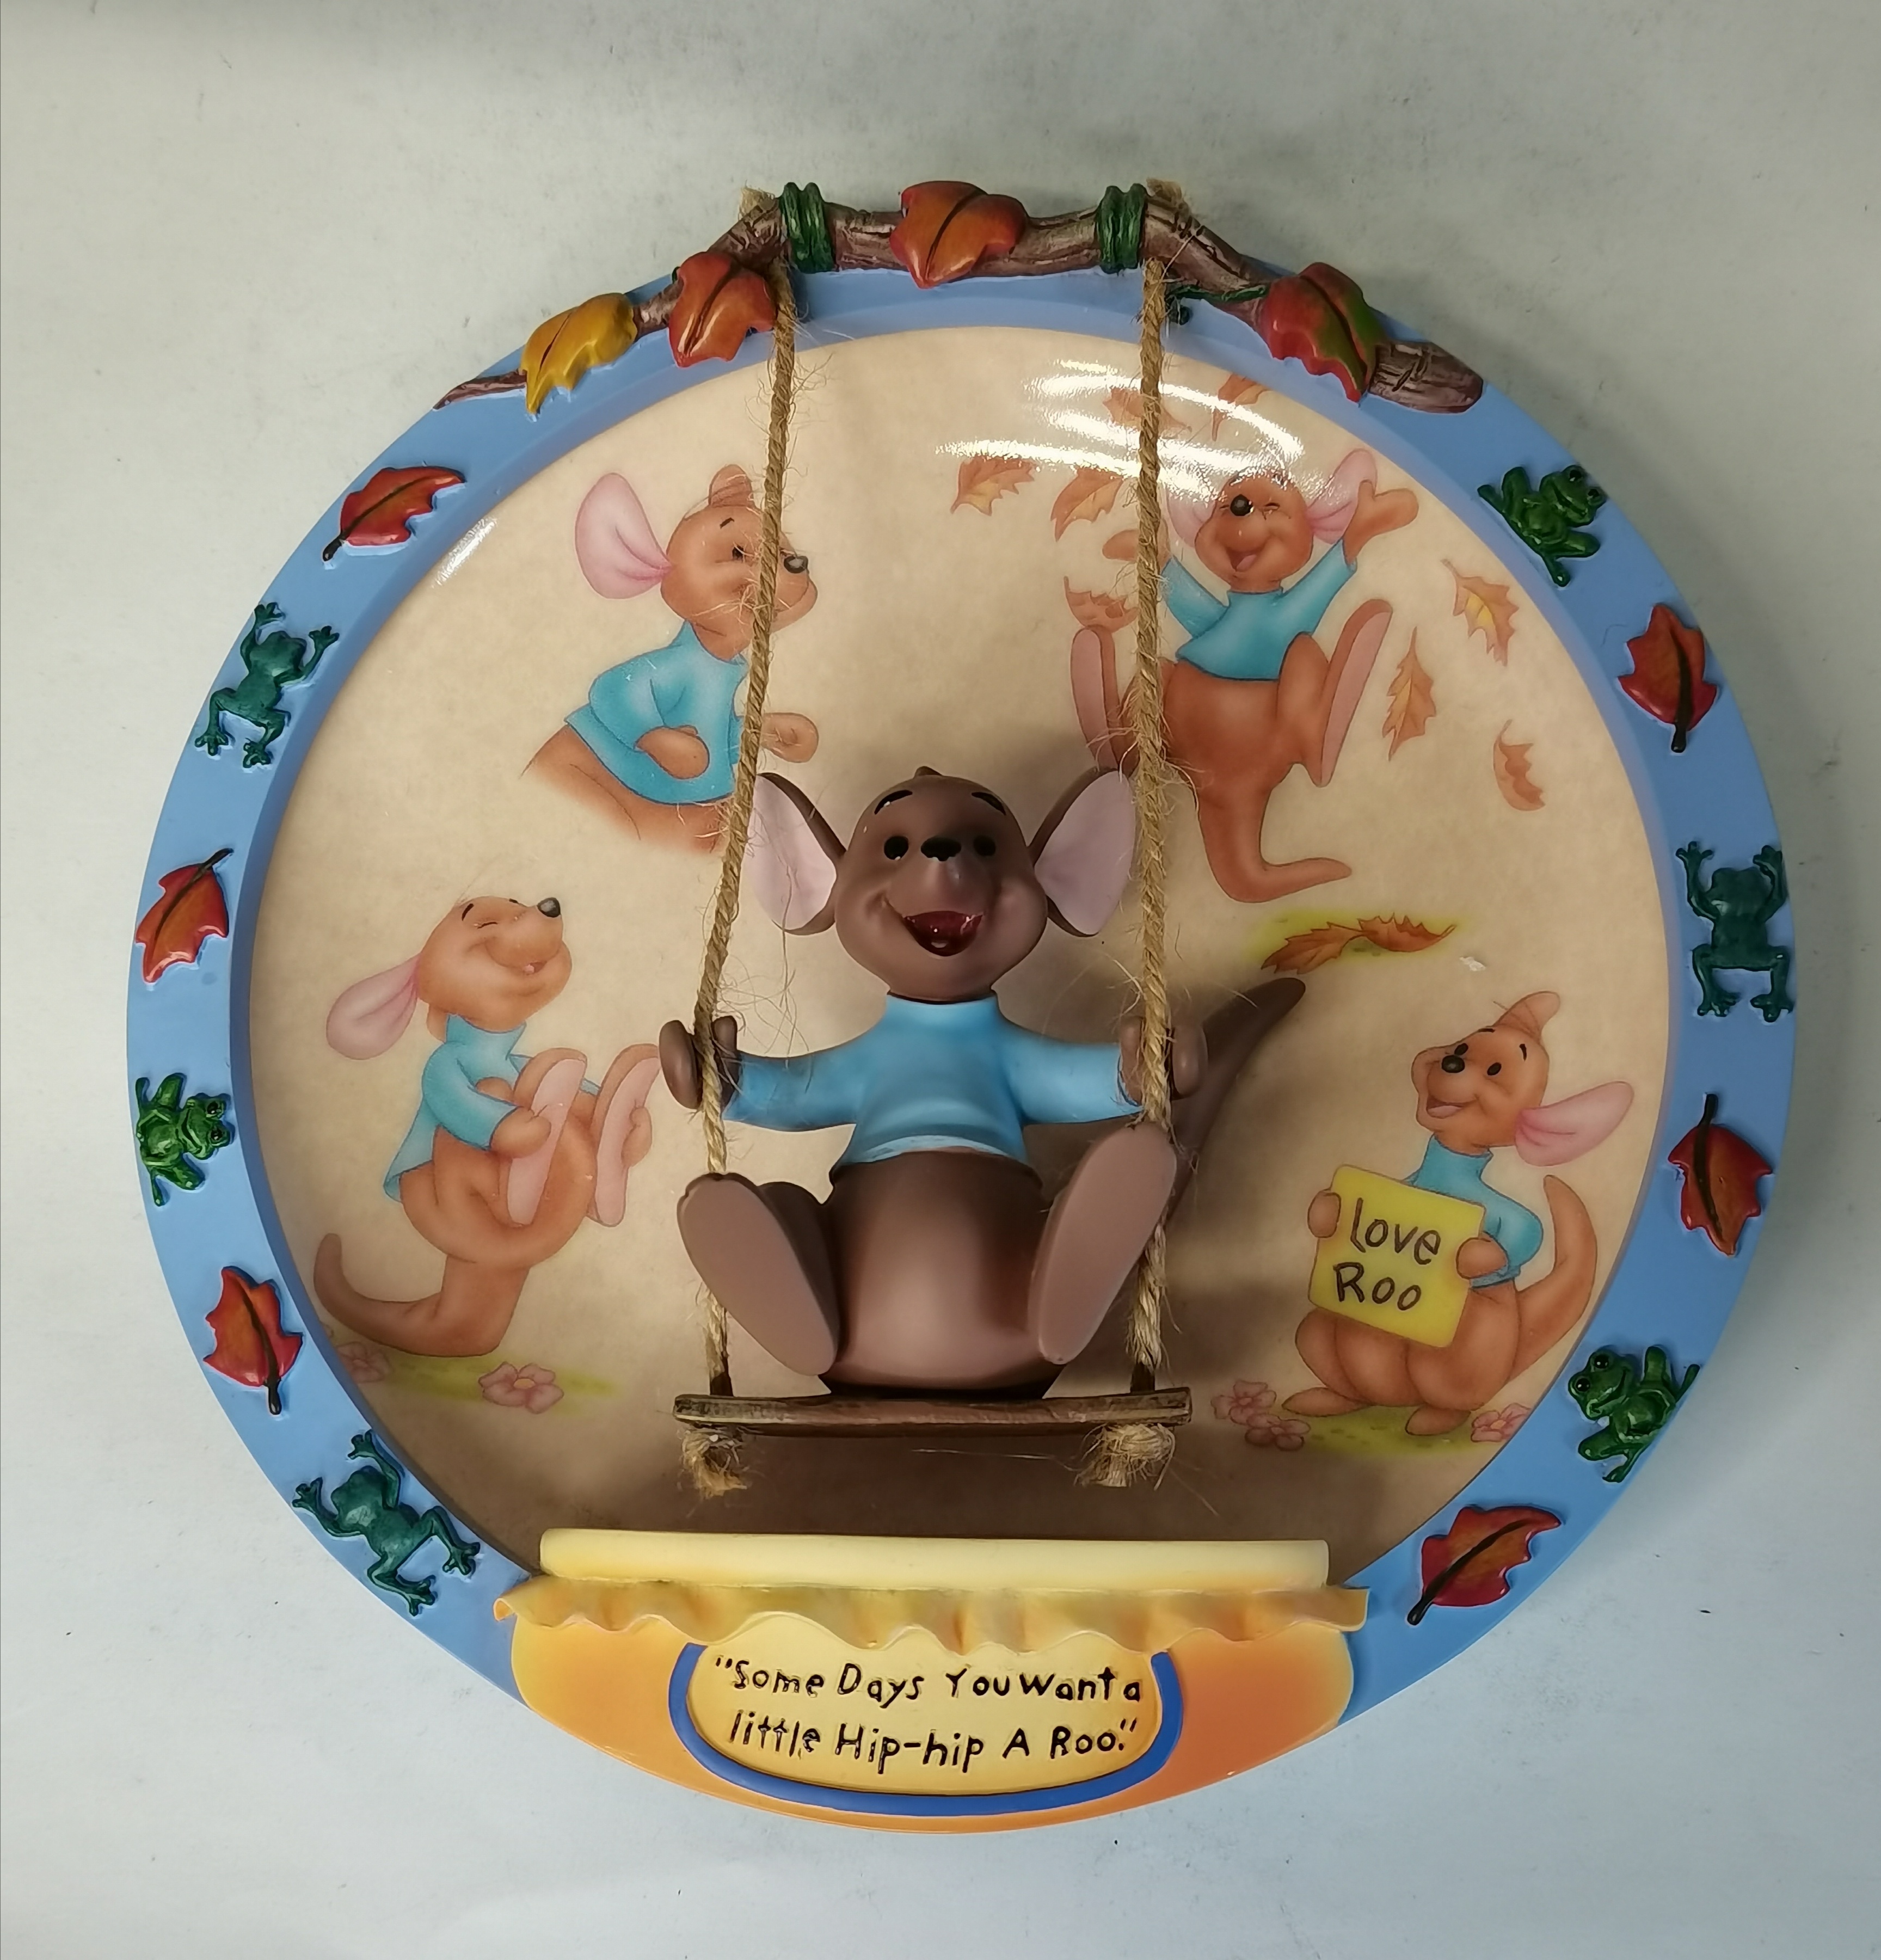 x5 Limited Edition Disney Plates with certificates and boxes - Image 6 of 8